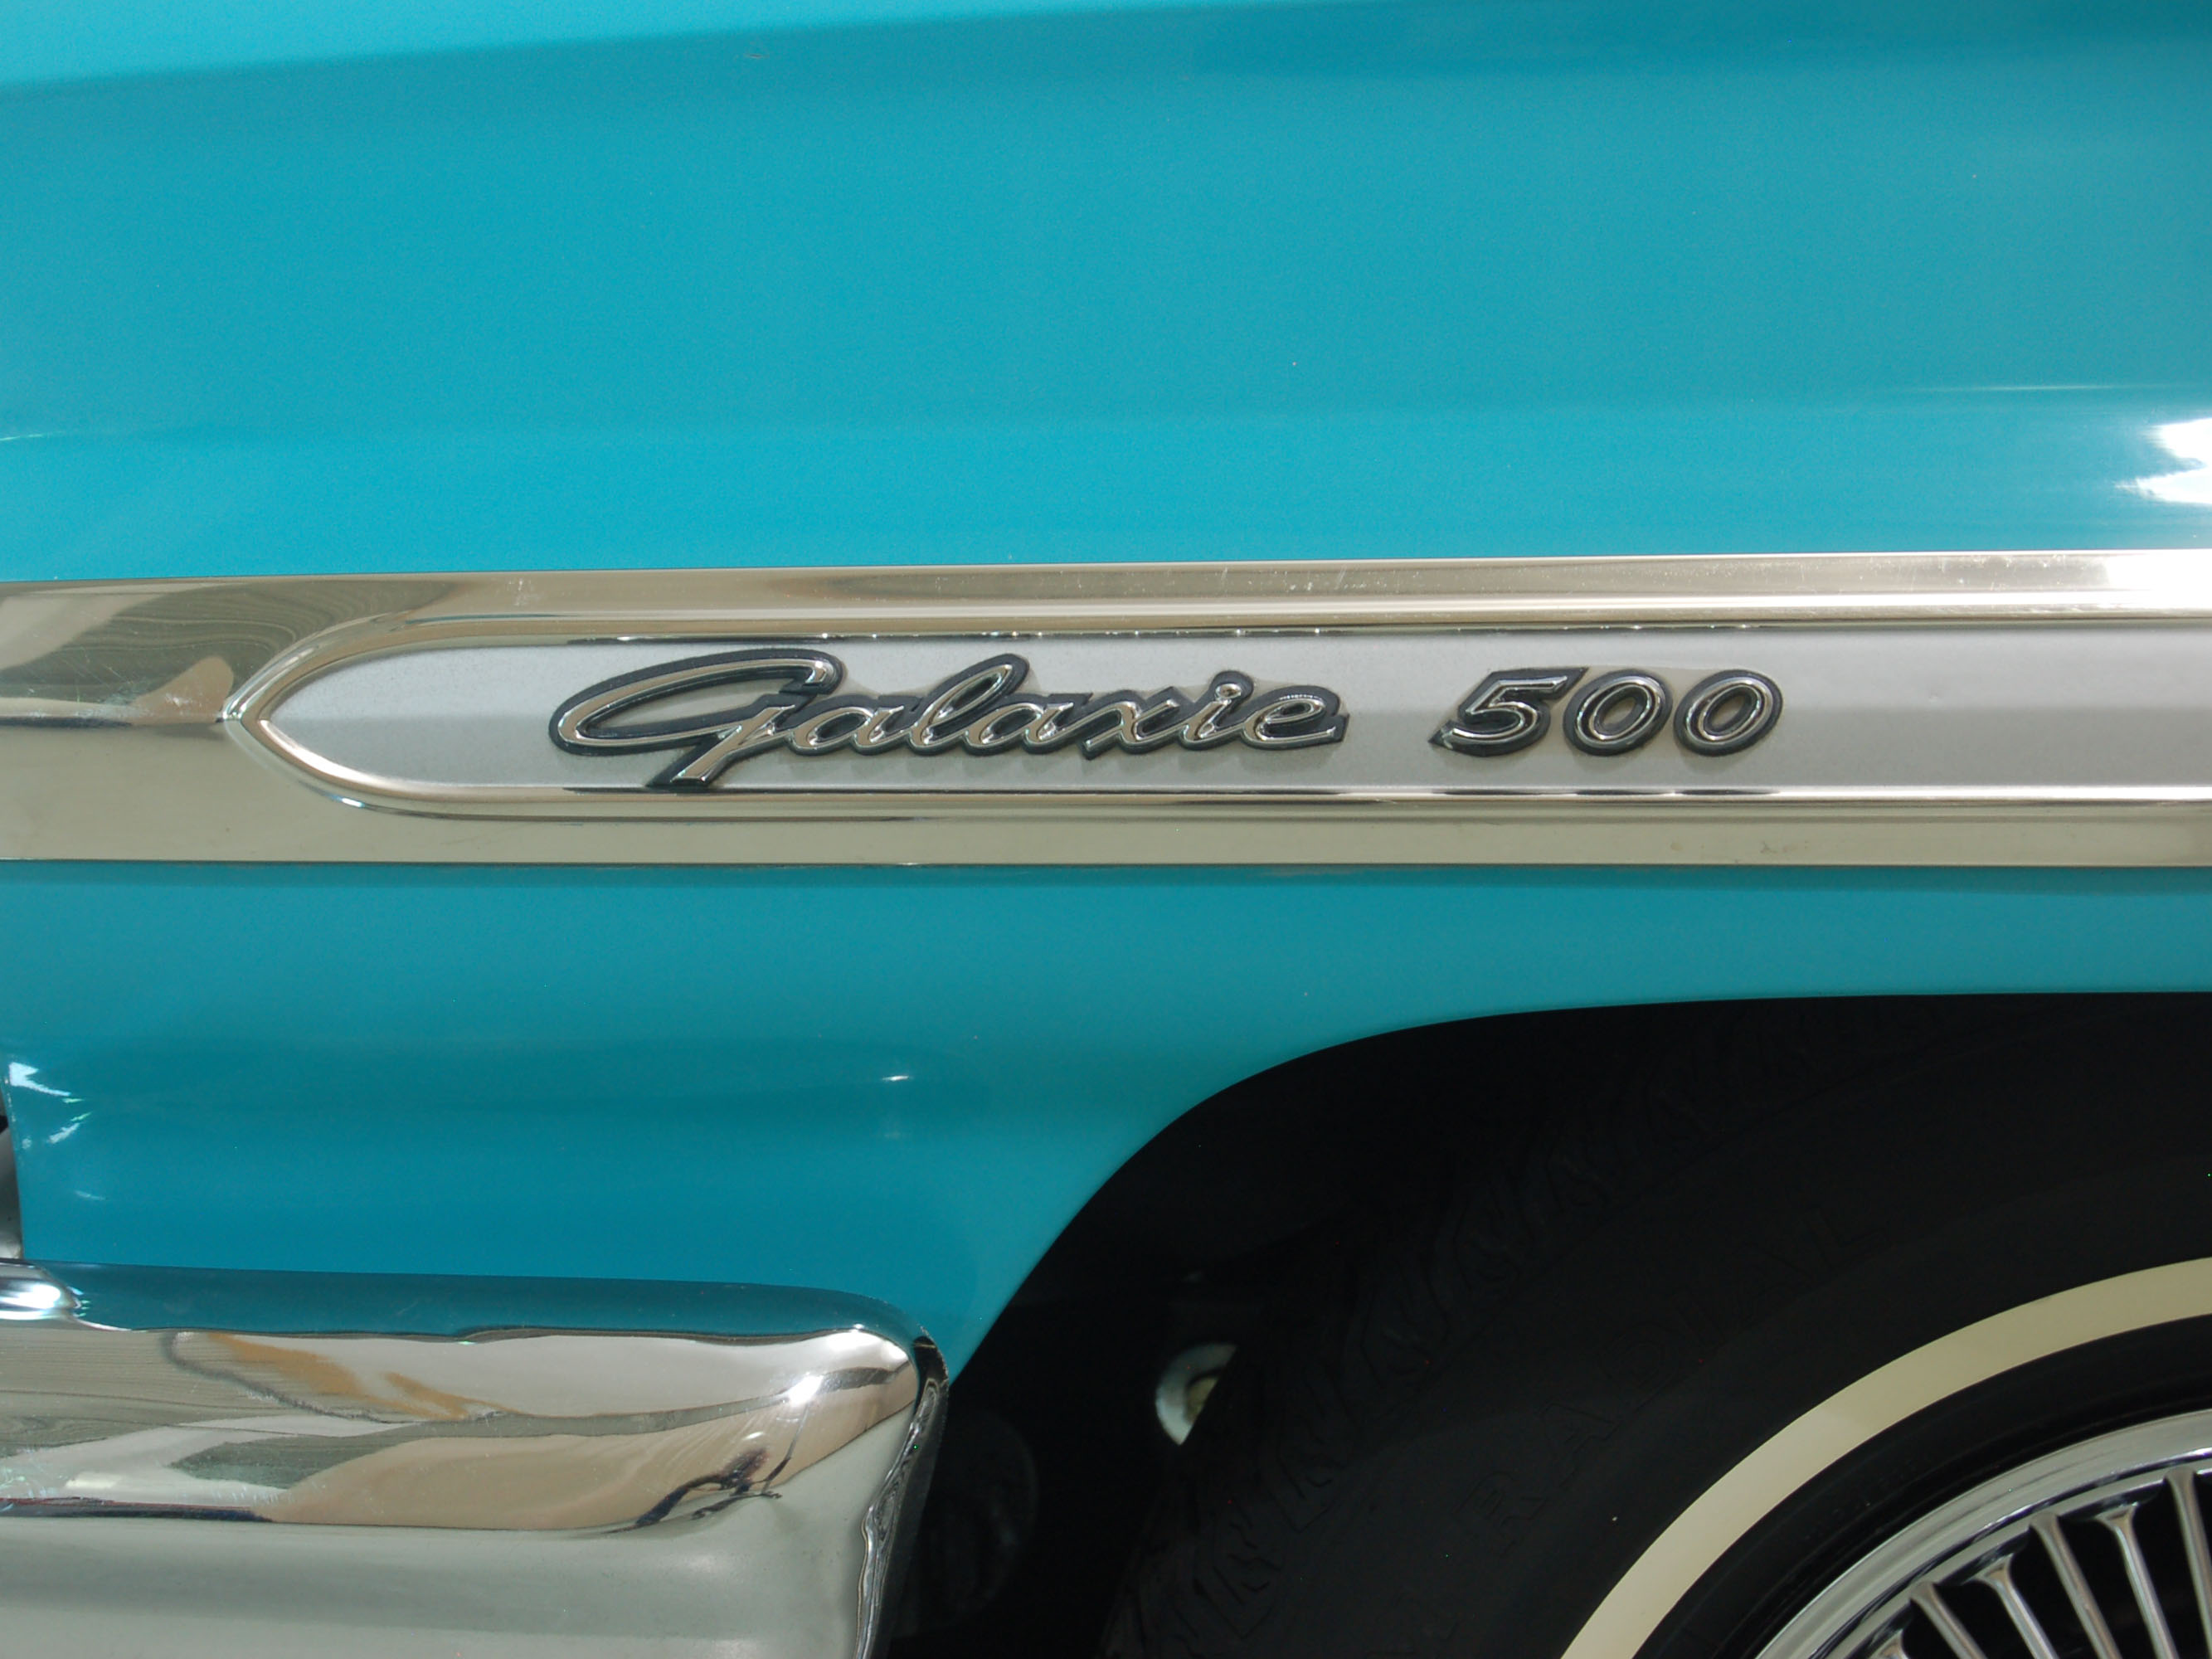 1962 ford galaxie 500 sunliner